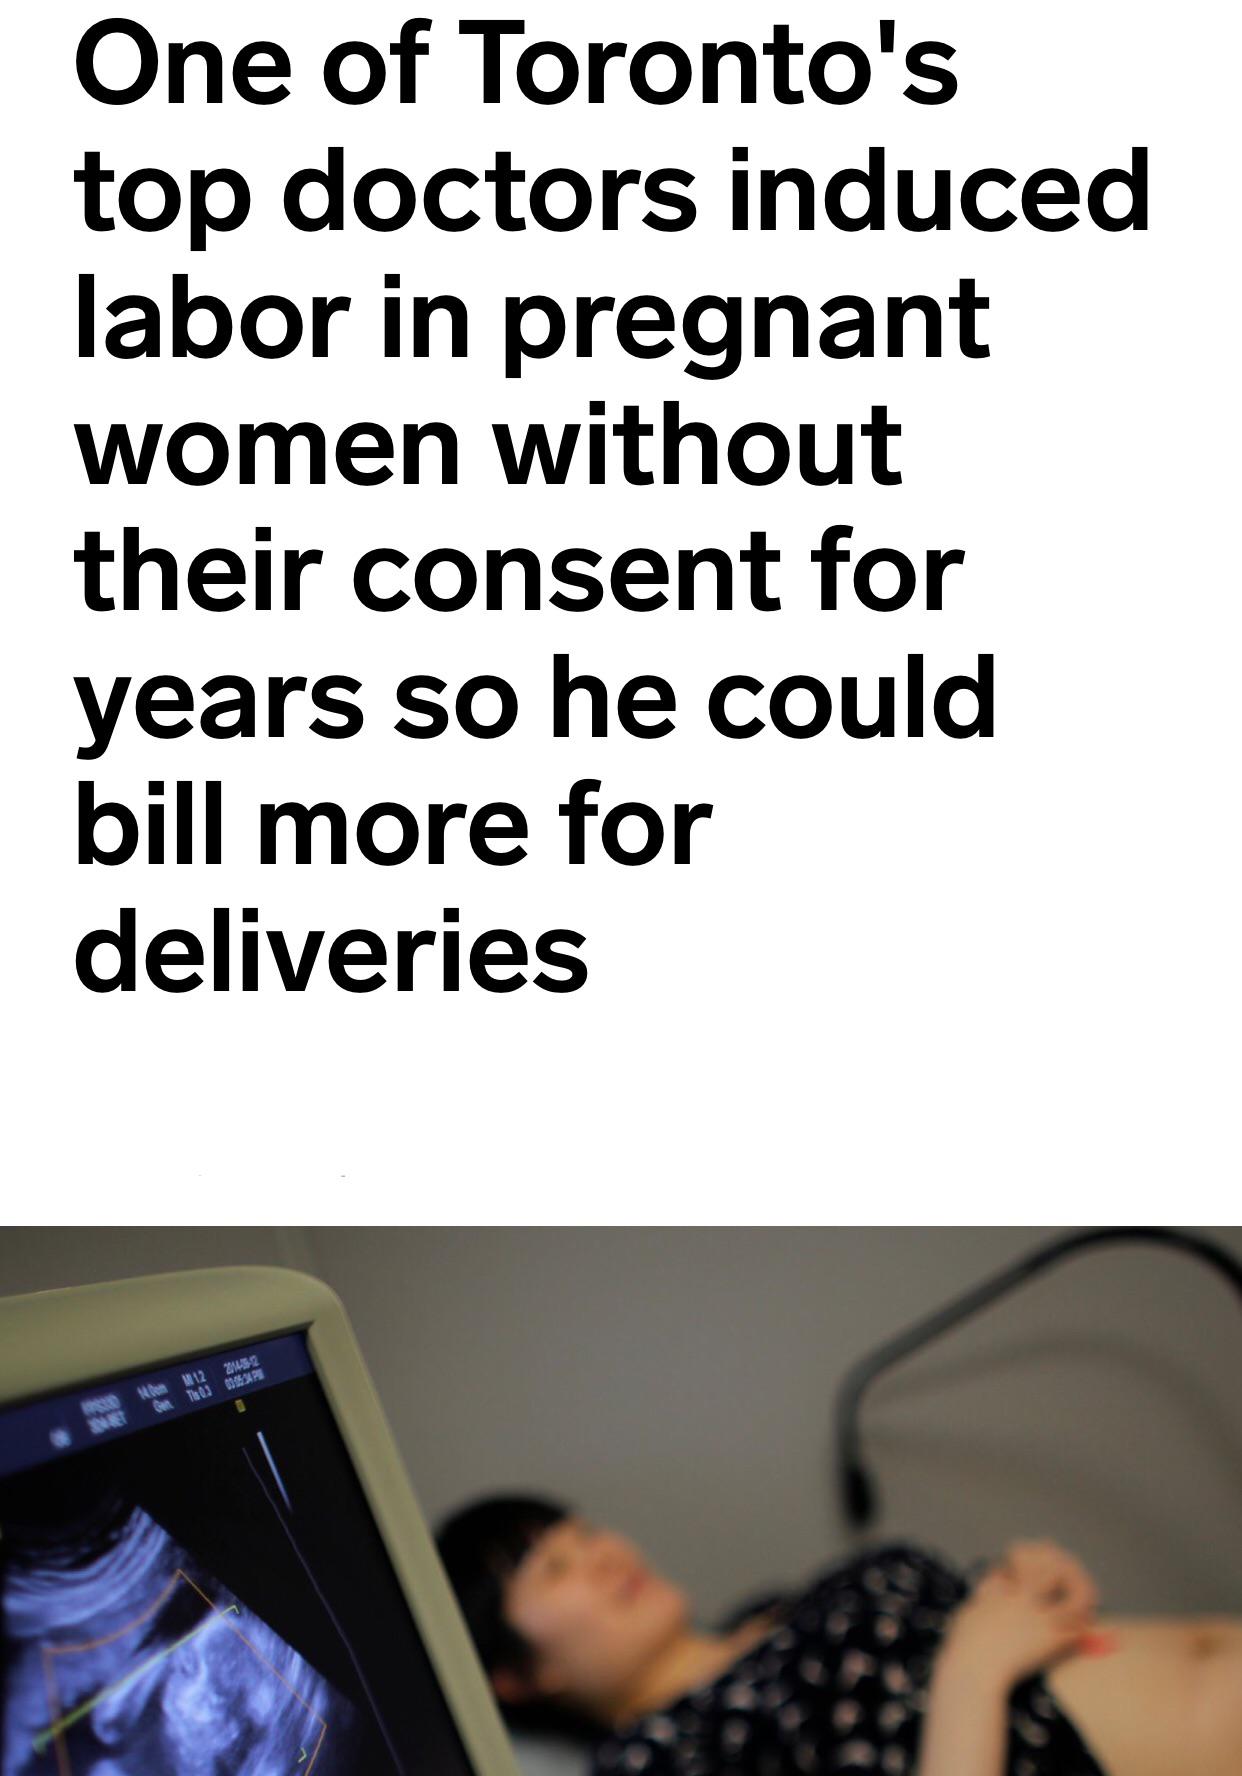 One of Toronto's top doctors induced labor in pregnant women without their consent for years so he could bill more for deliveries 12